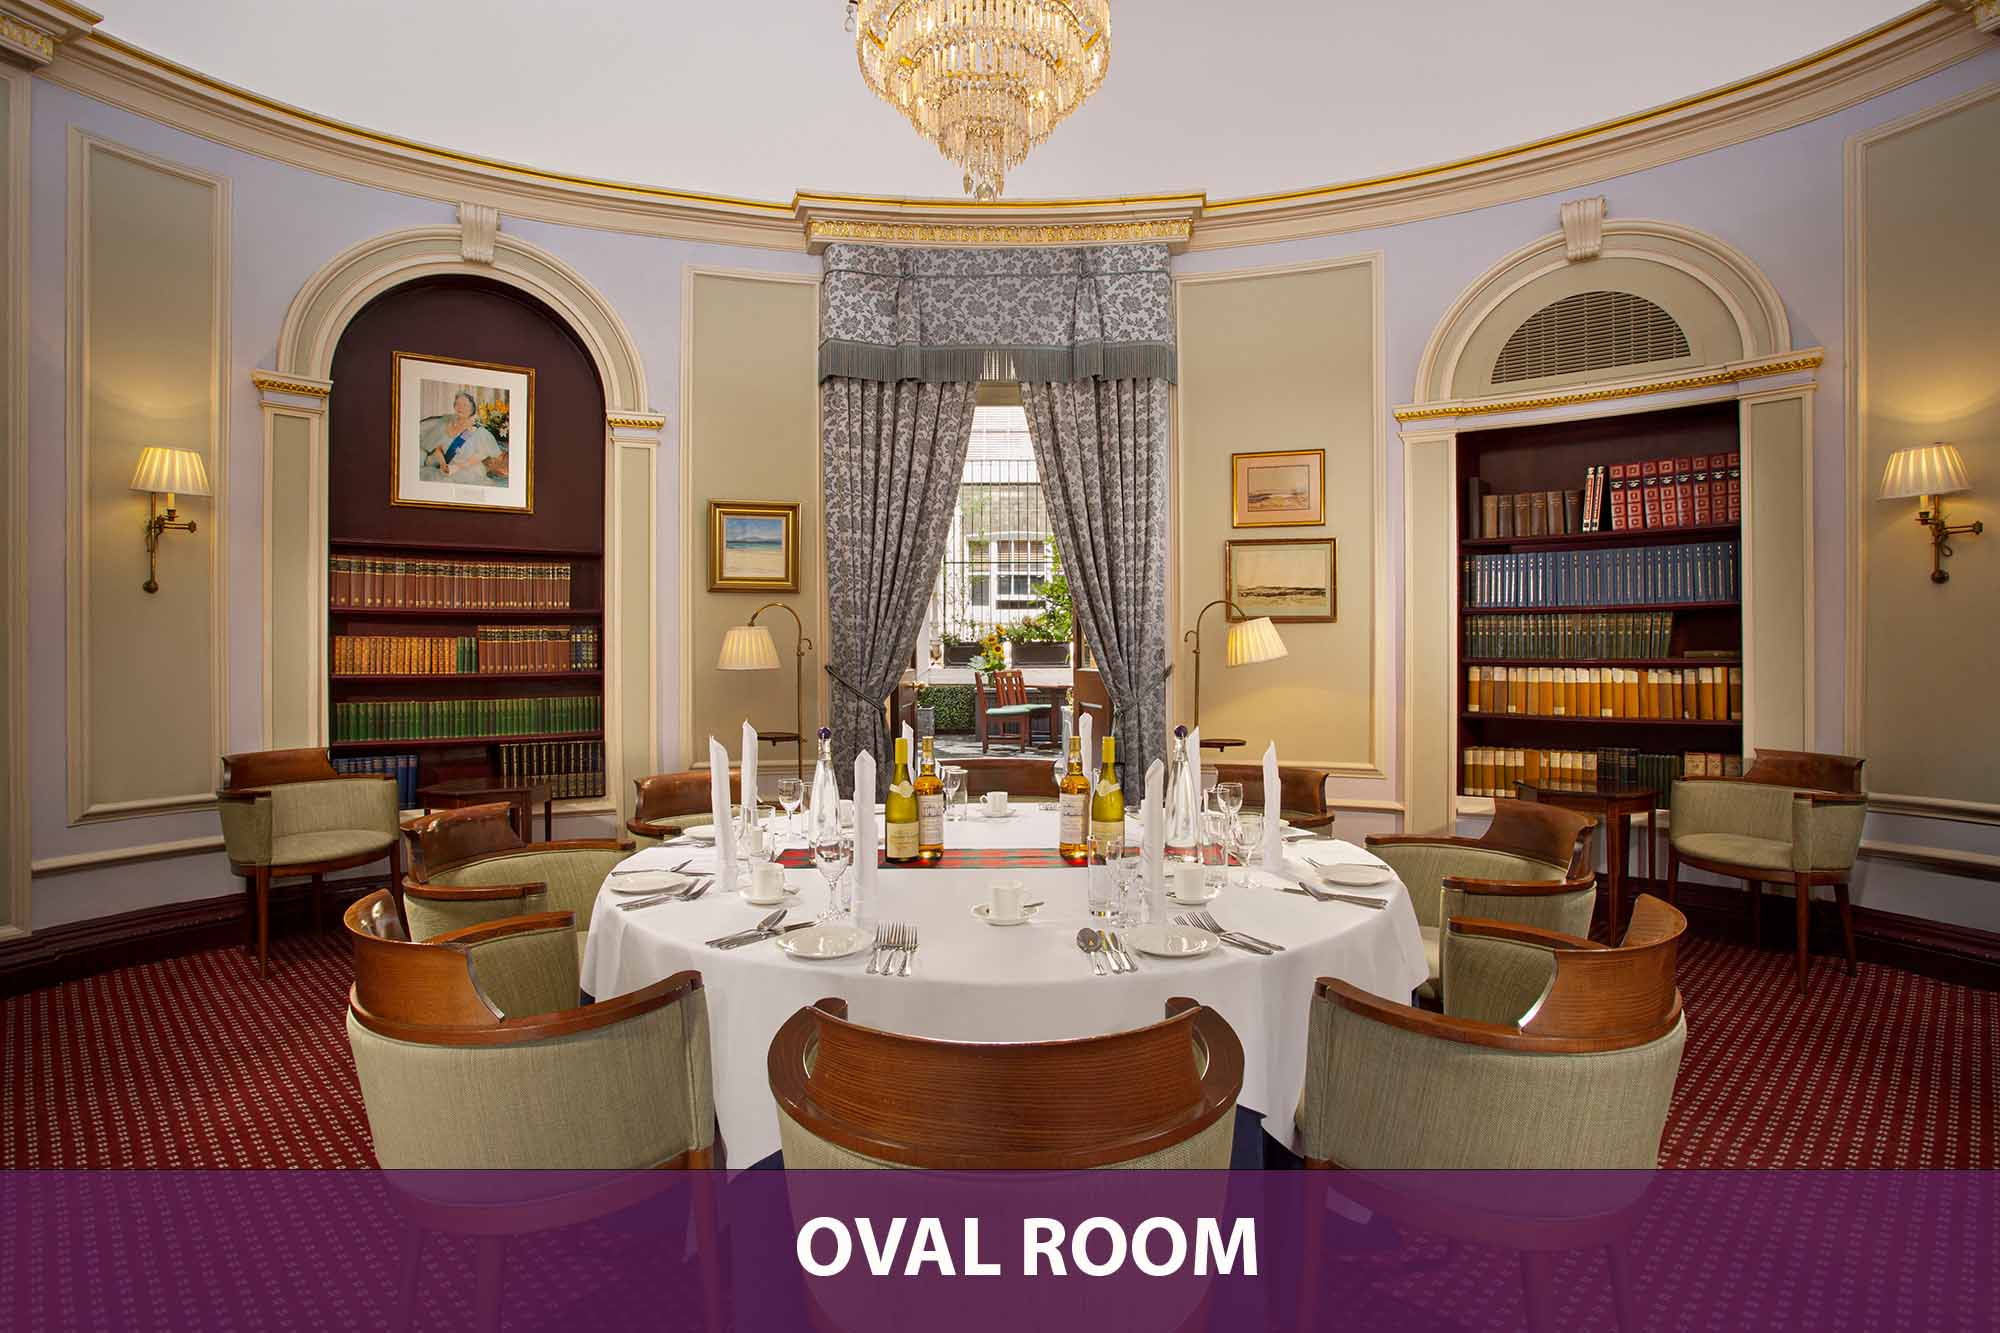 Oval Room_round table dining